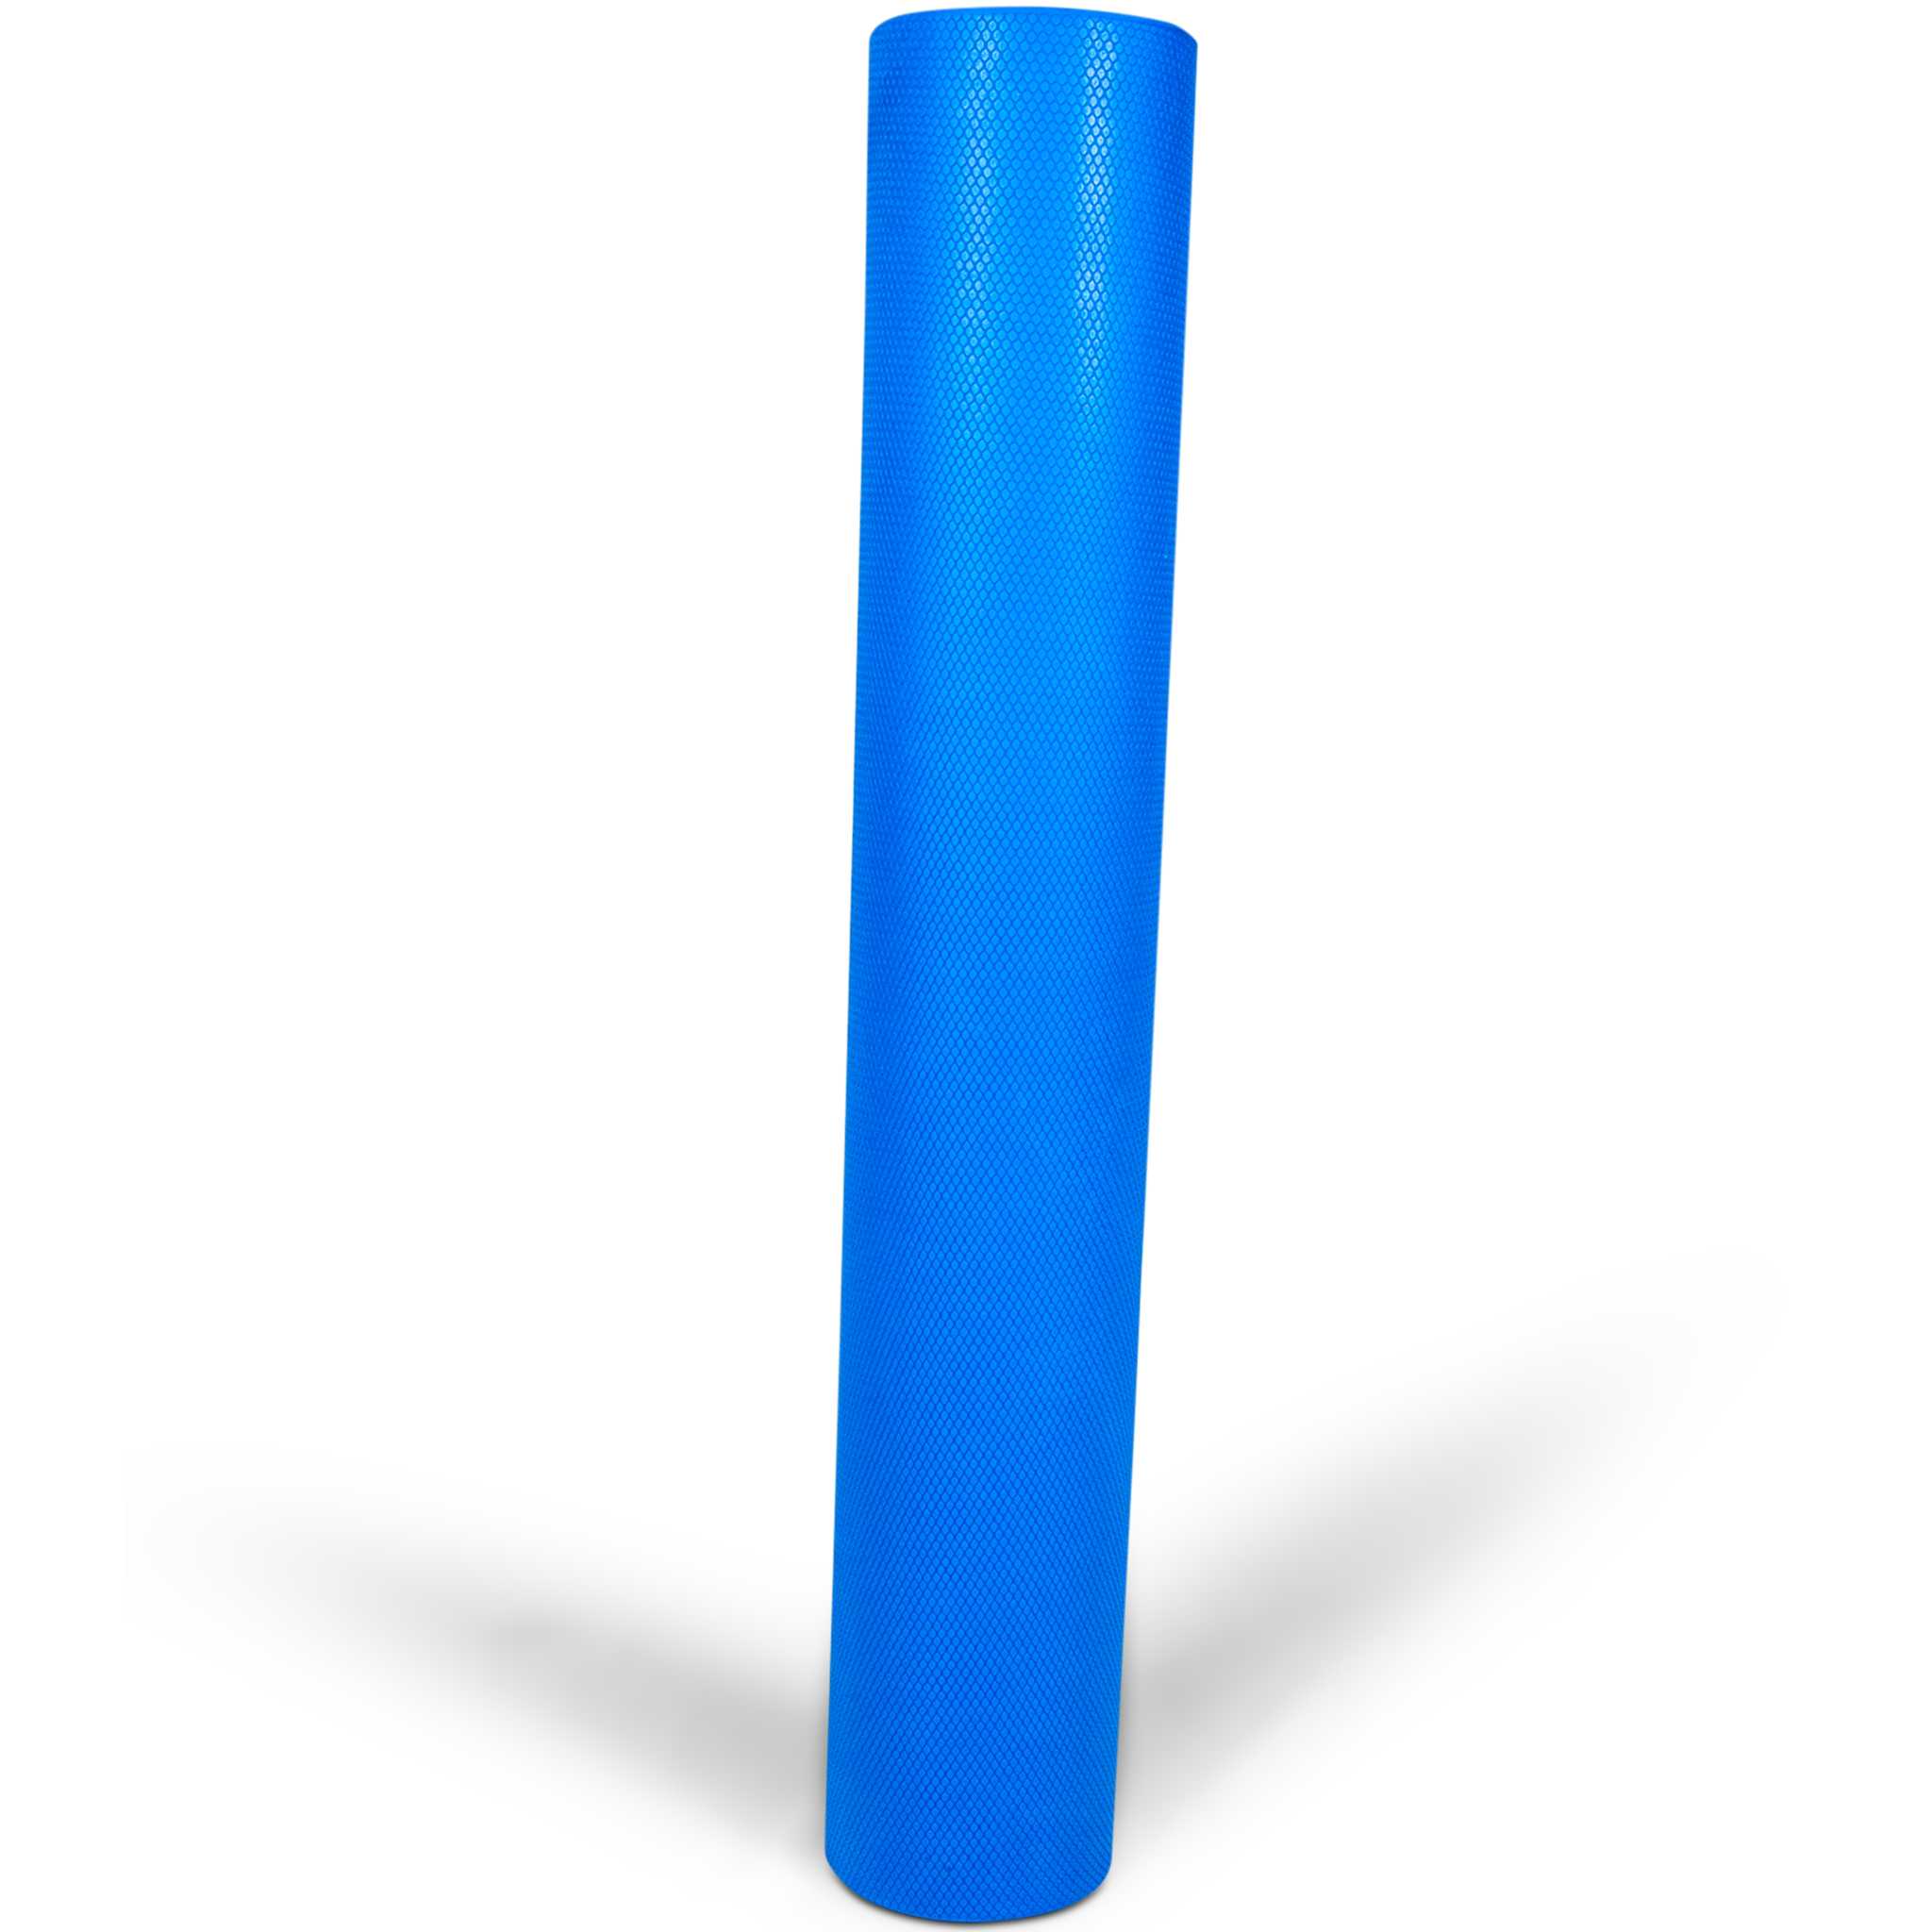 IBF High-Density Deluxe Foam Roller, Available in 18” & 36”